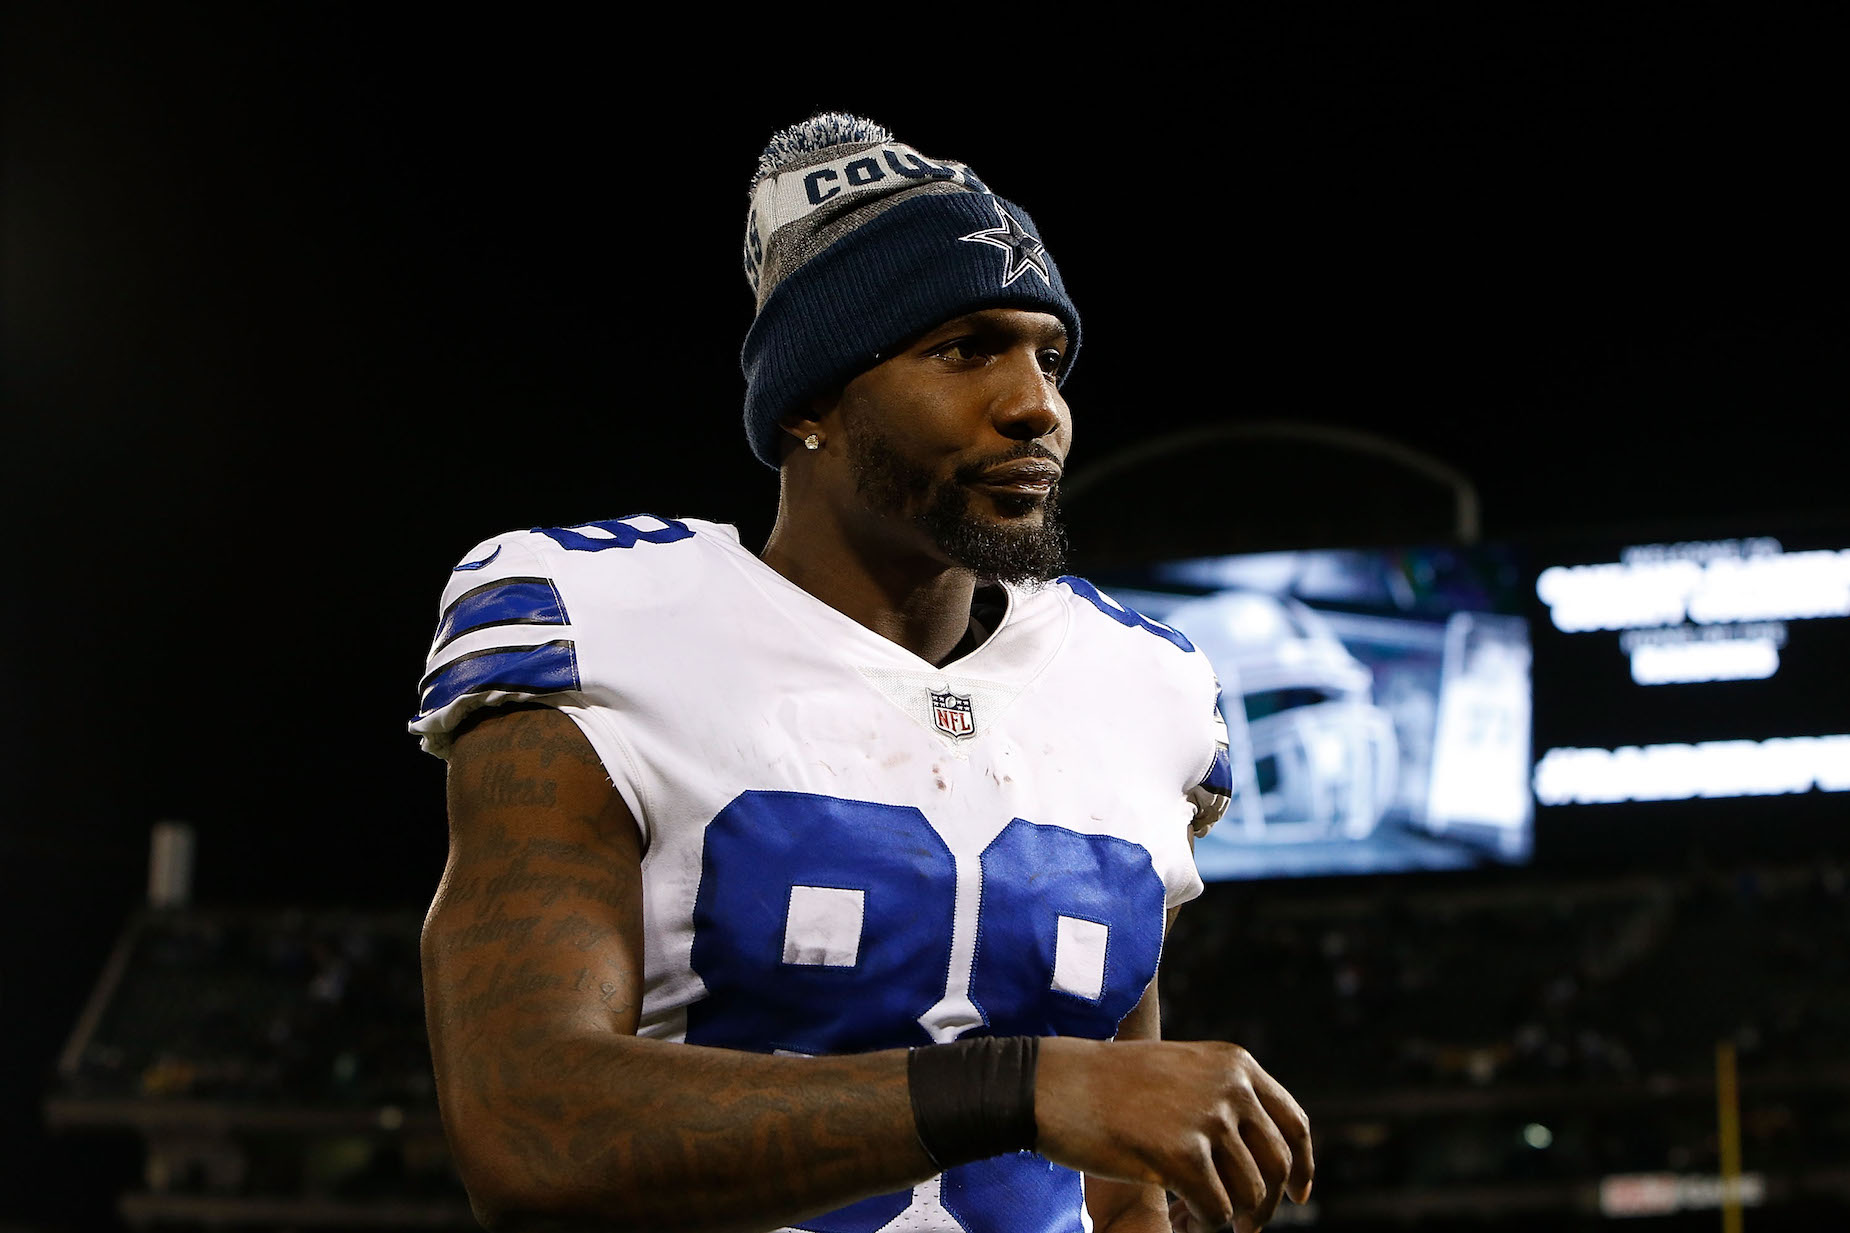 How Much Money Will Dez Bryant Earn in Salary With the Baltimore Ravens?